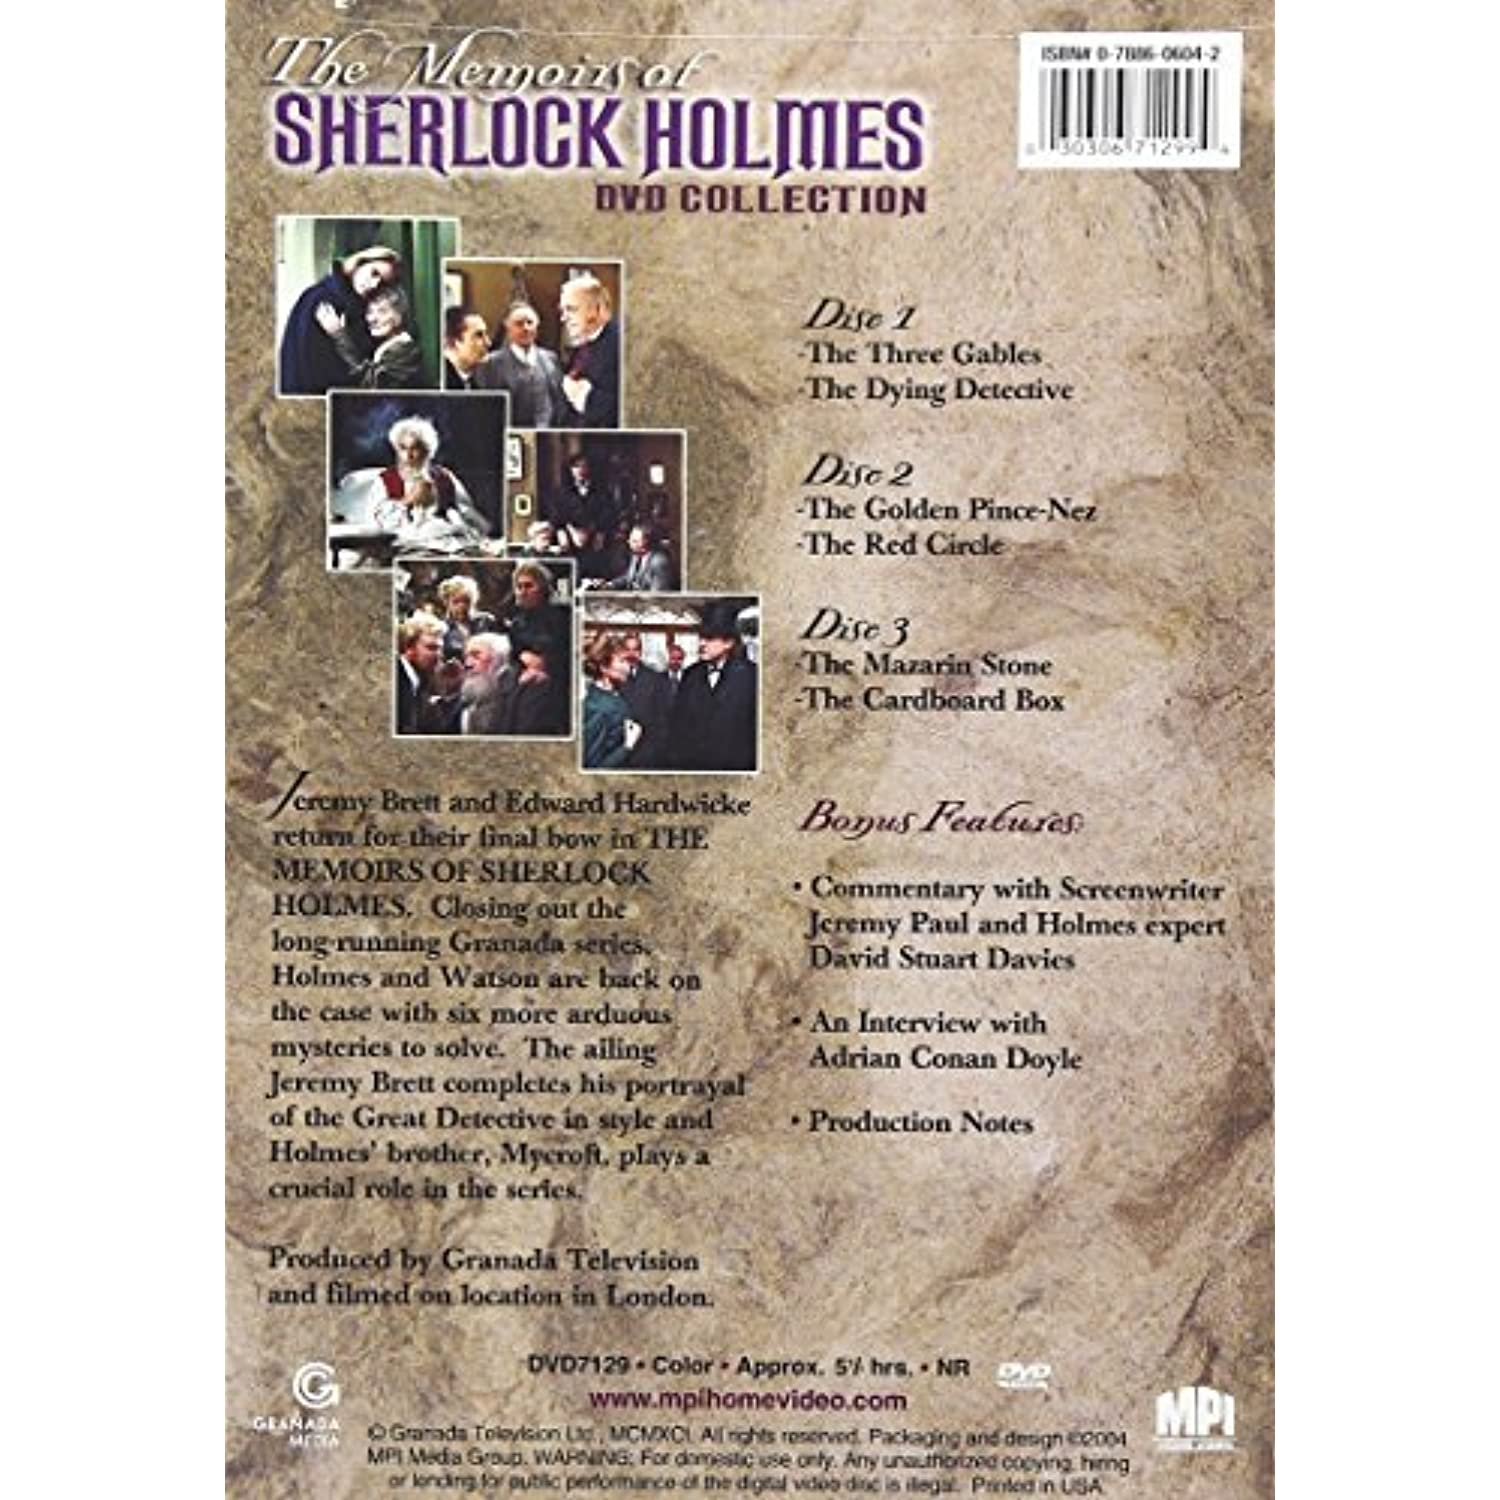 The Memoirs of Sherlock Holmes: DVD Collection (DVD) - image 2 of 2